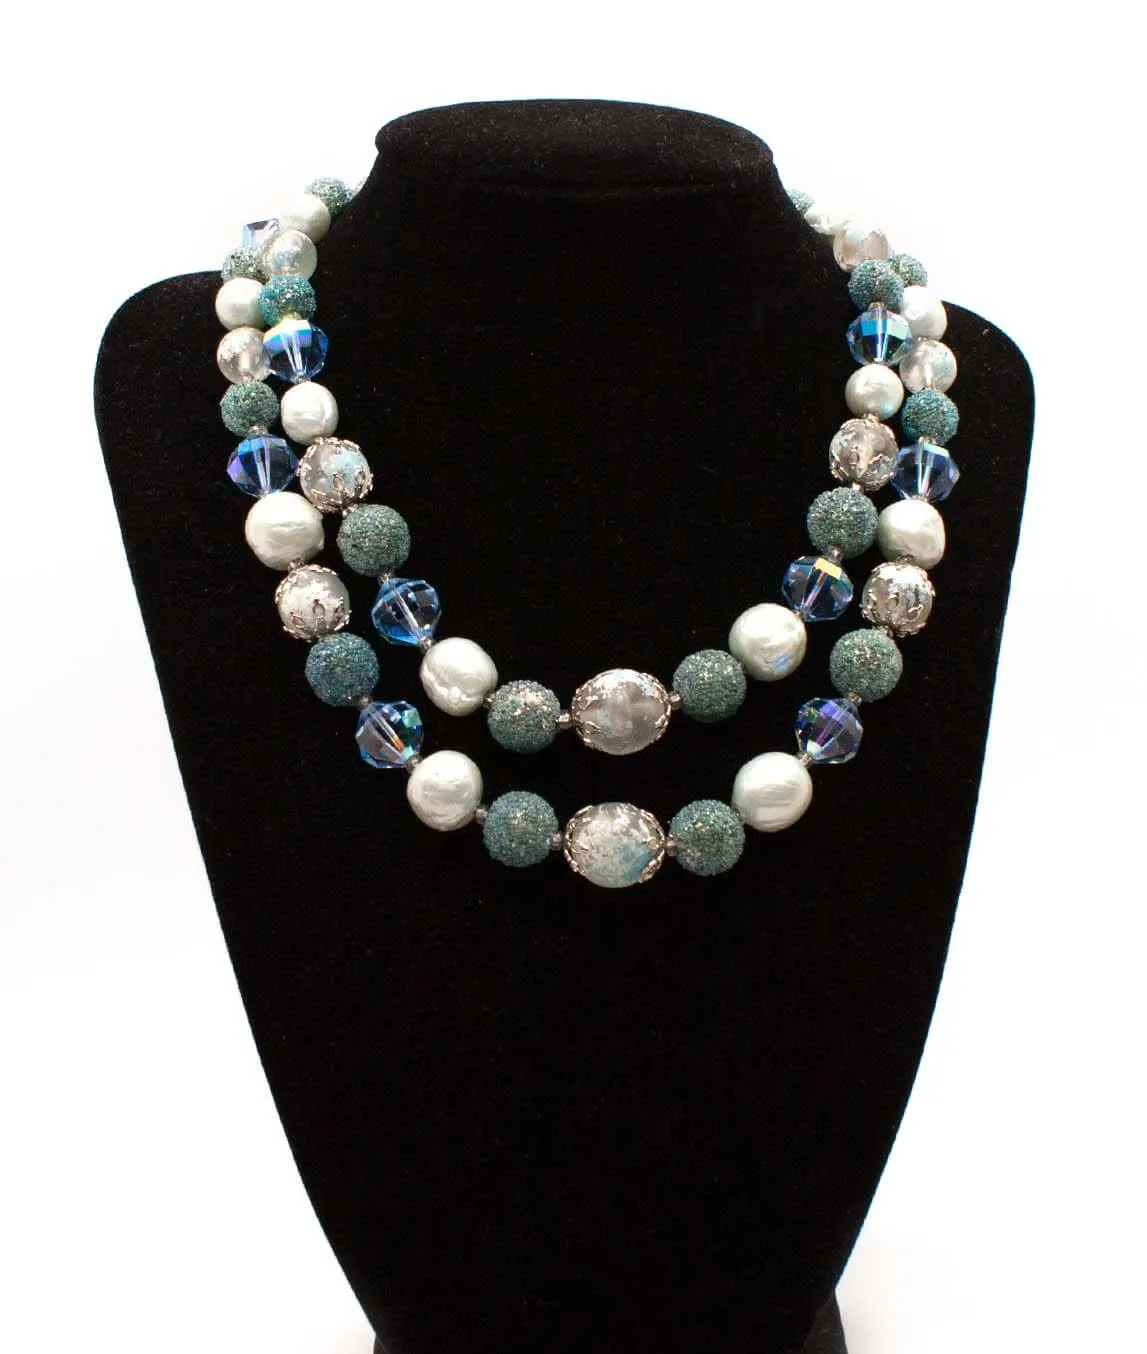 BLUE FACETED GLASS BEADS NECKLACE - DECO PERIOD - Gillian Horsup Vintage  Costume Jewellery